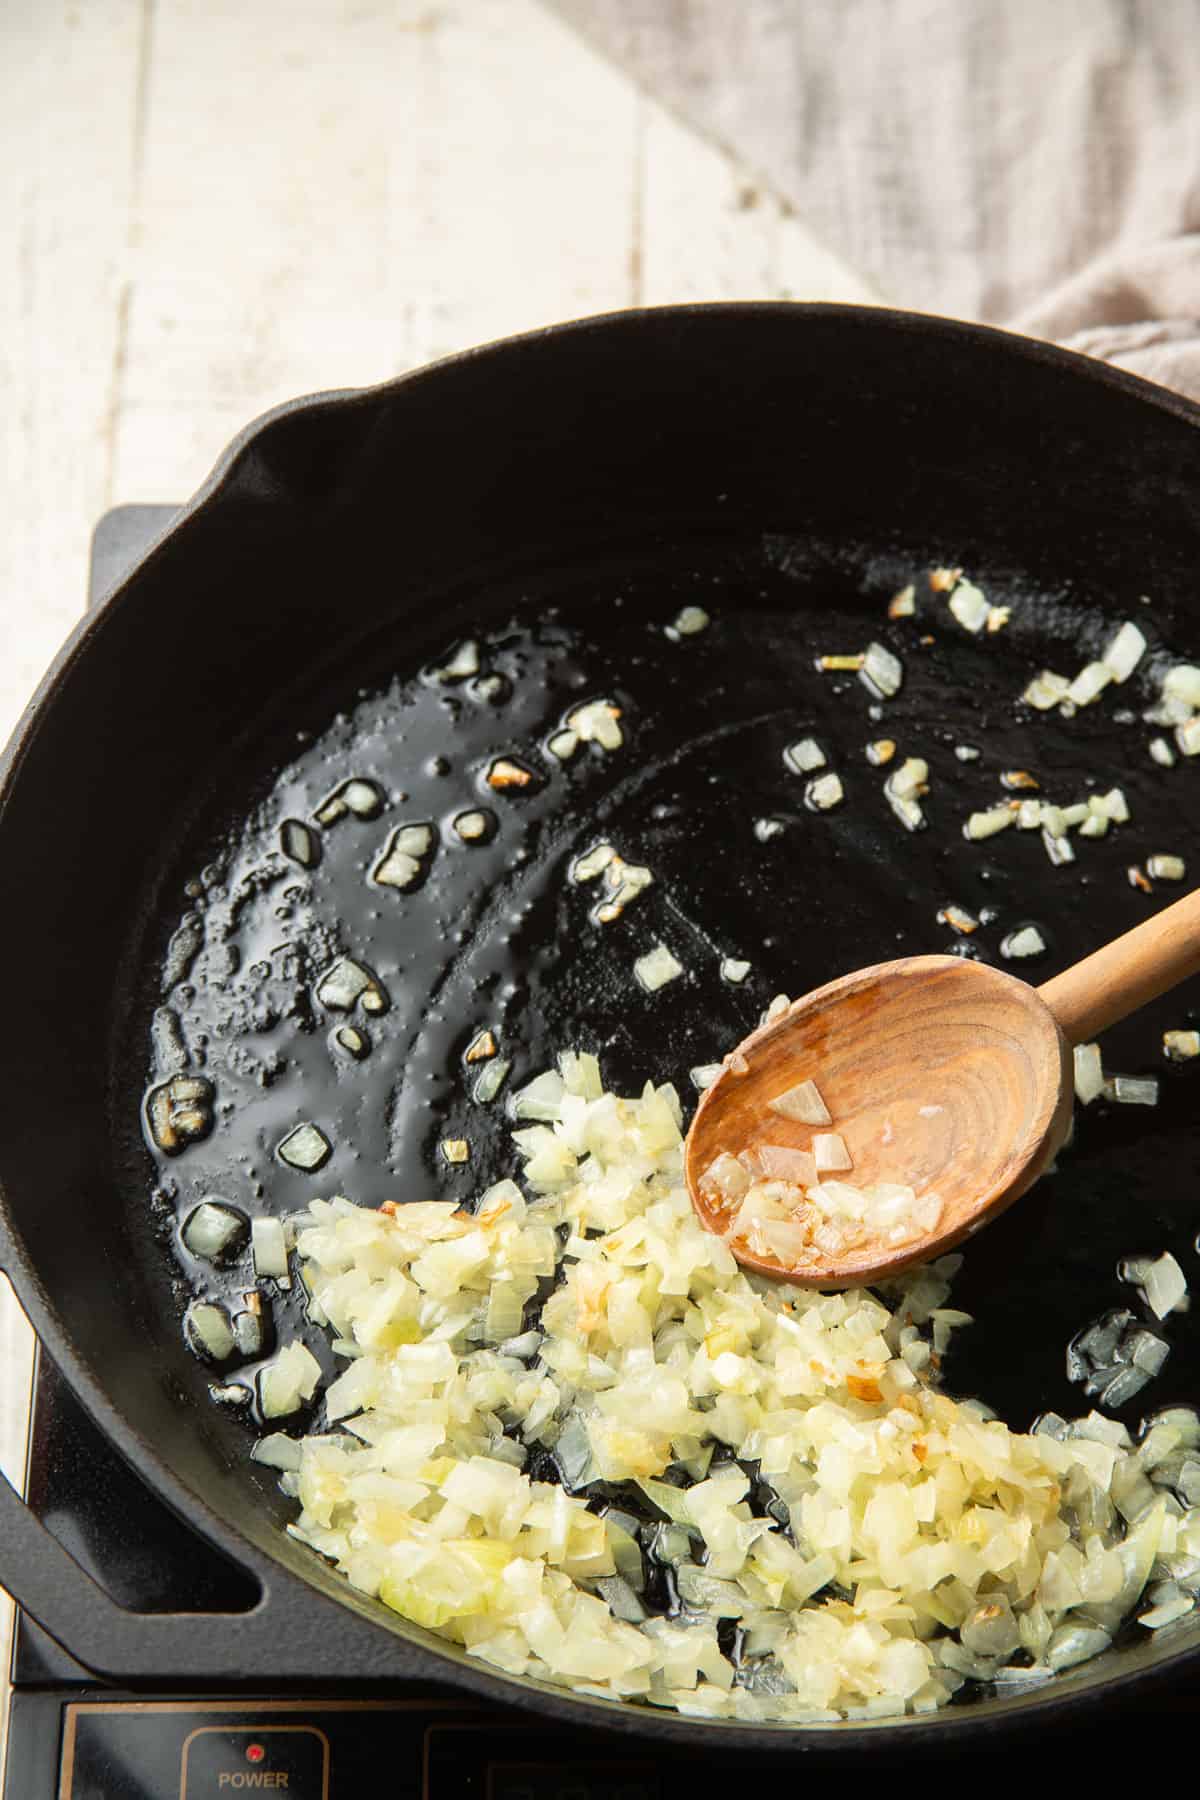 Diced onion cooking in oil in a skillet.